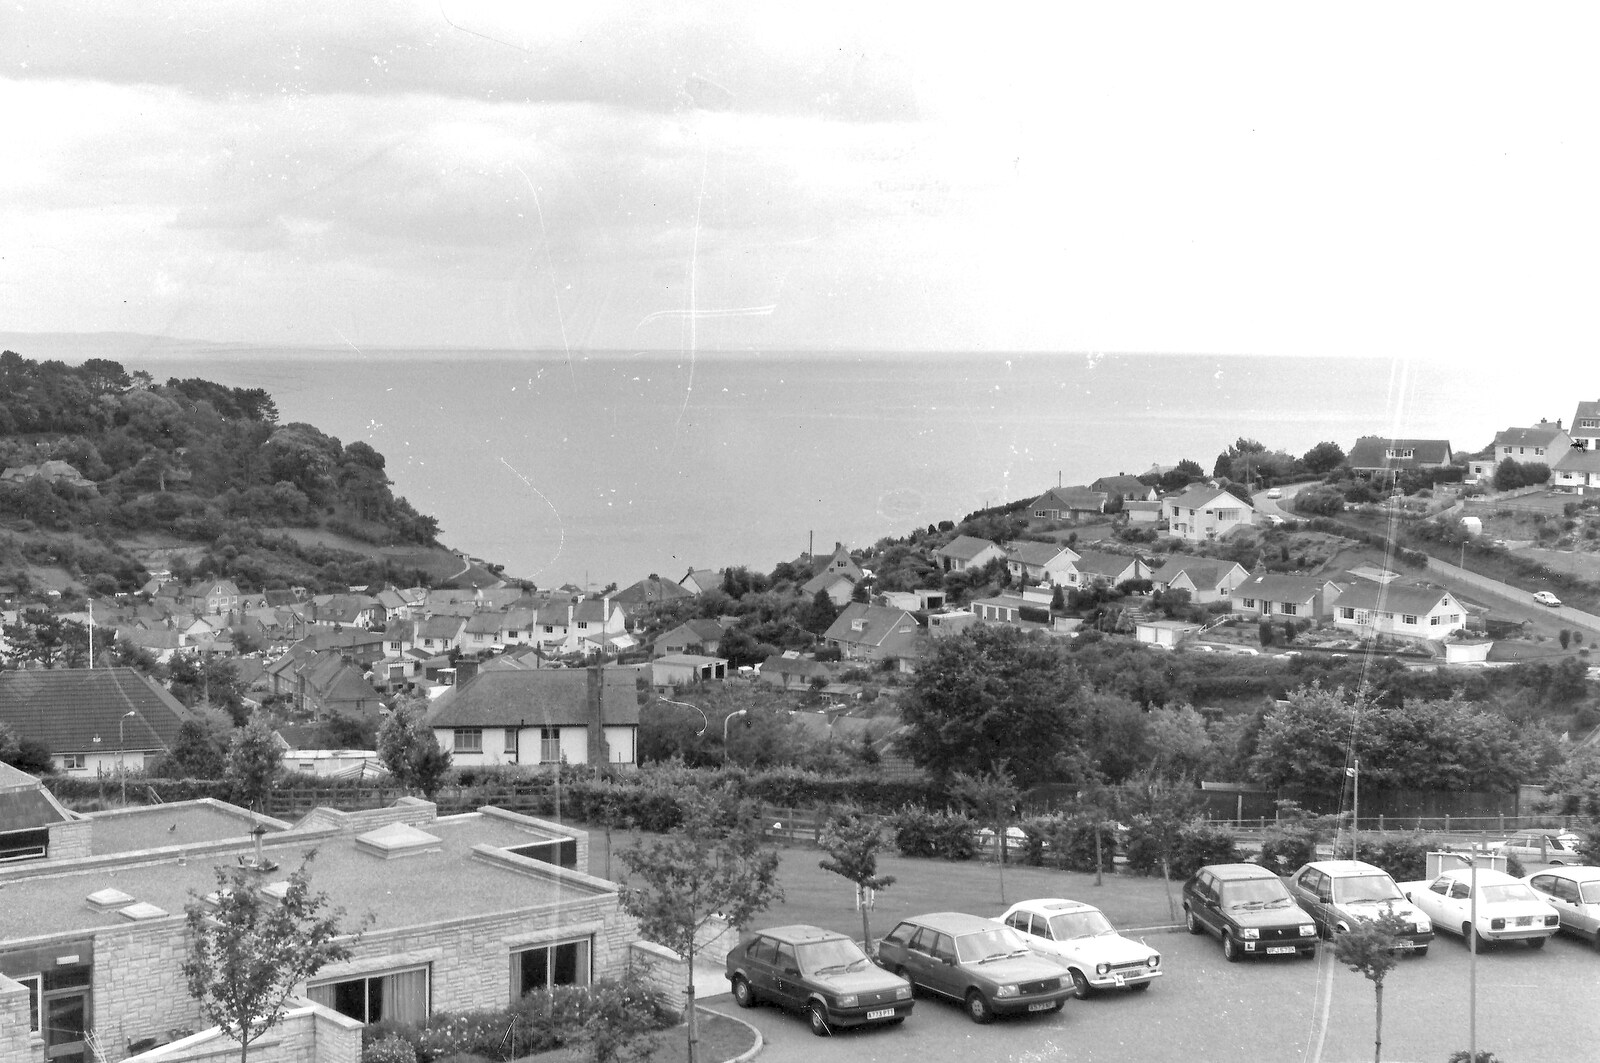 A view over the town of Beer in Devon from Phil's Birthday and Newlands Camping, Charmouth and Hordle, Dorset and Hampshire - 7th August 1985